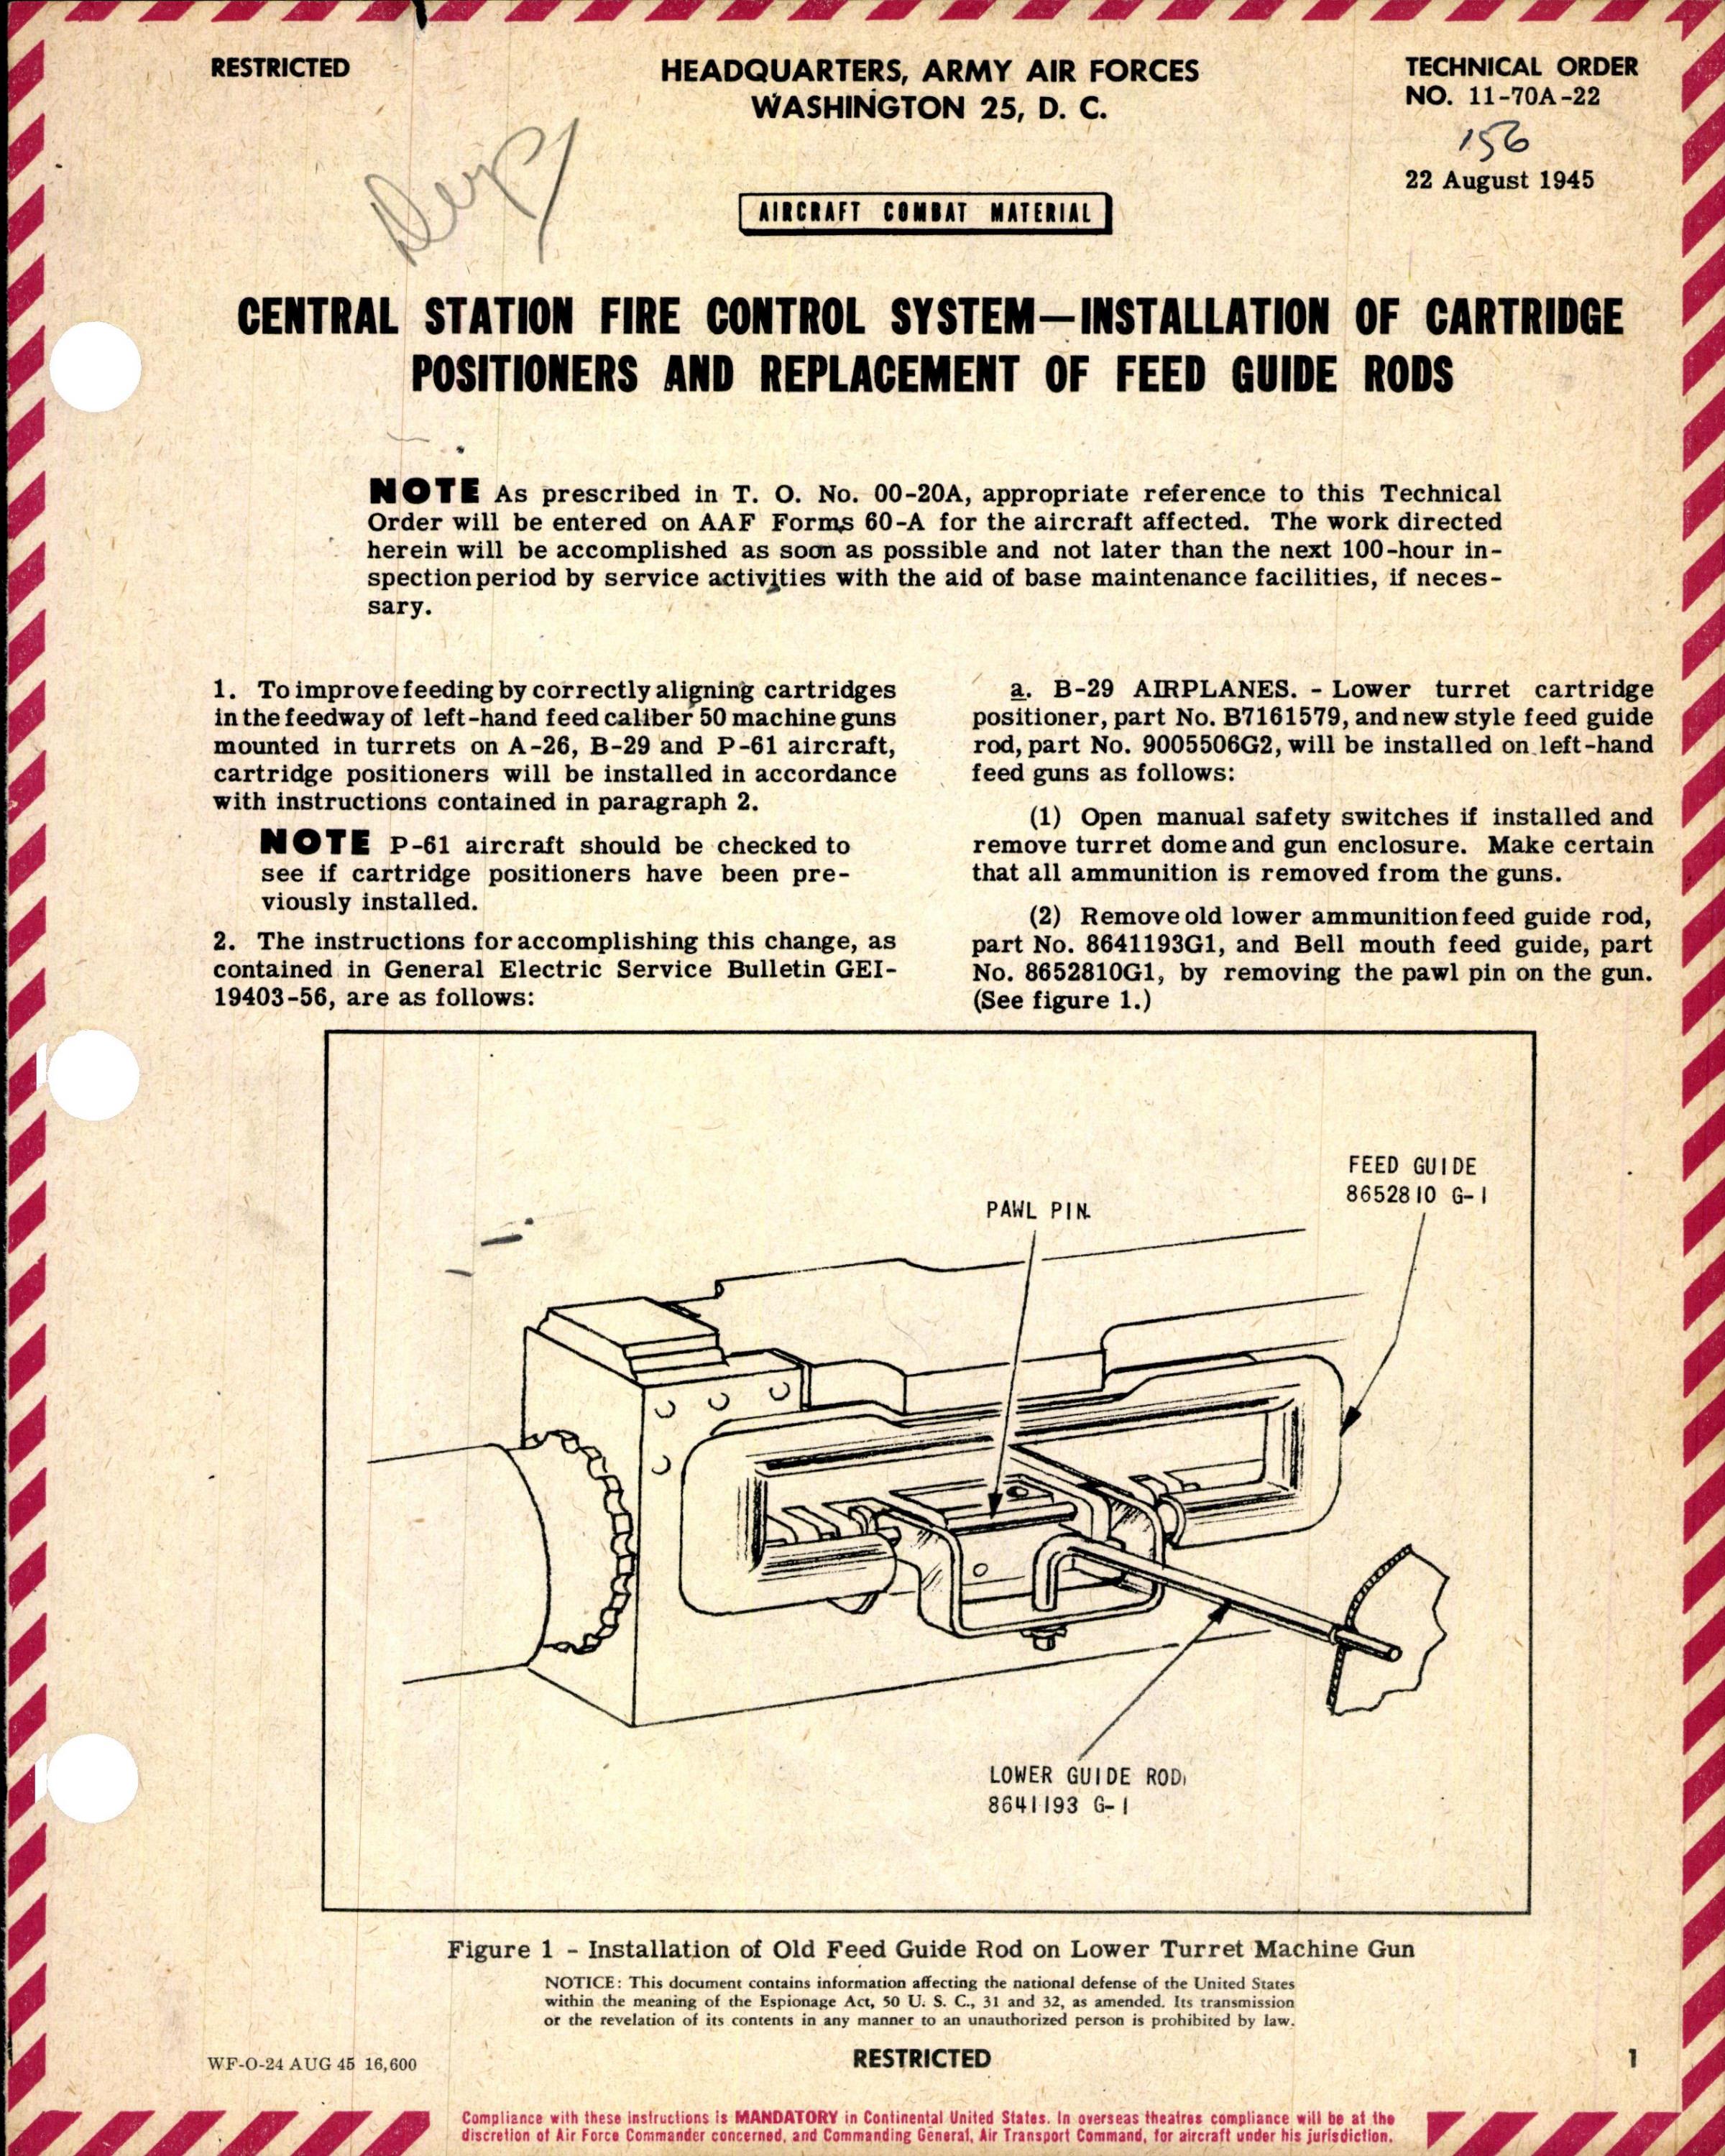 Sample page 1 from AirCorps Library document: Installation of Cartridge Positioners, Replacement of Feed Guide Rods